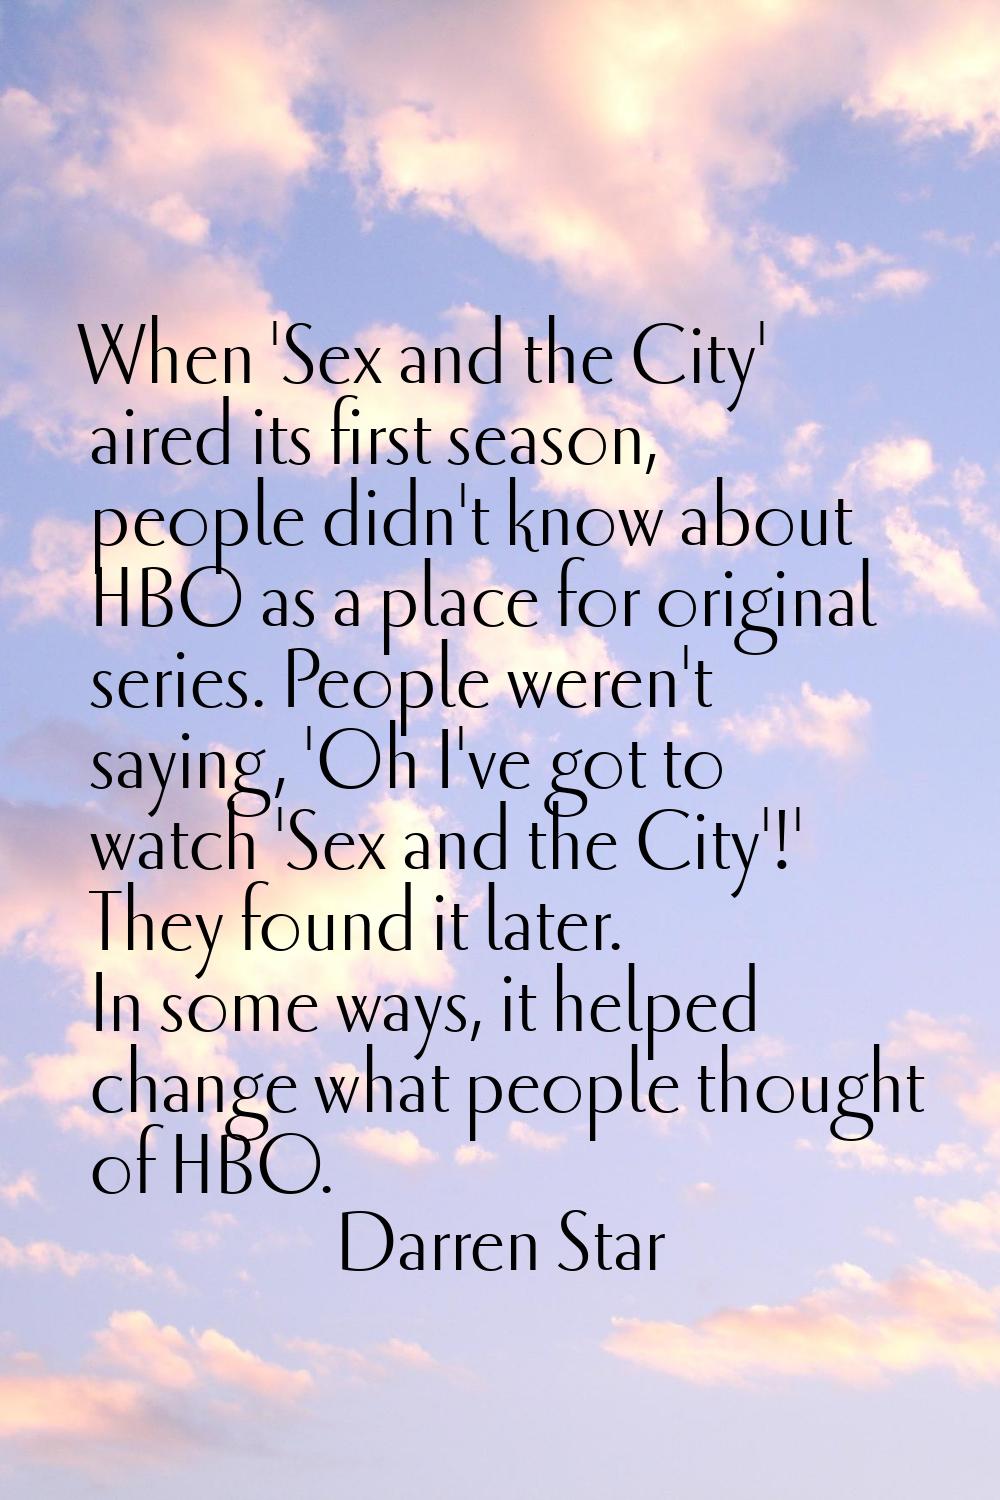 When 'Sex and the City' aired its first season, people didn't know about HBO as a place for origina